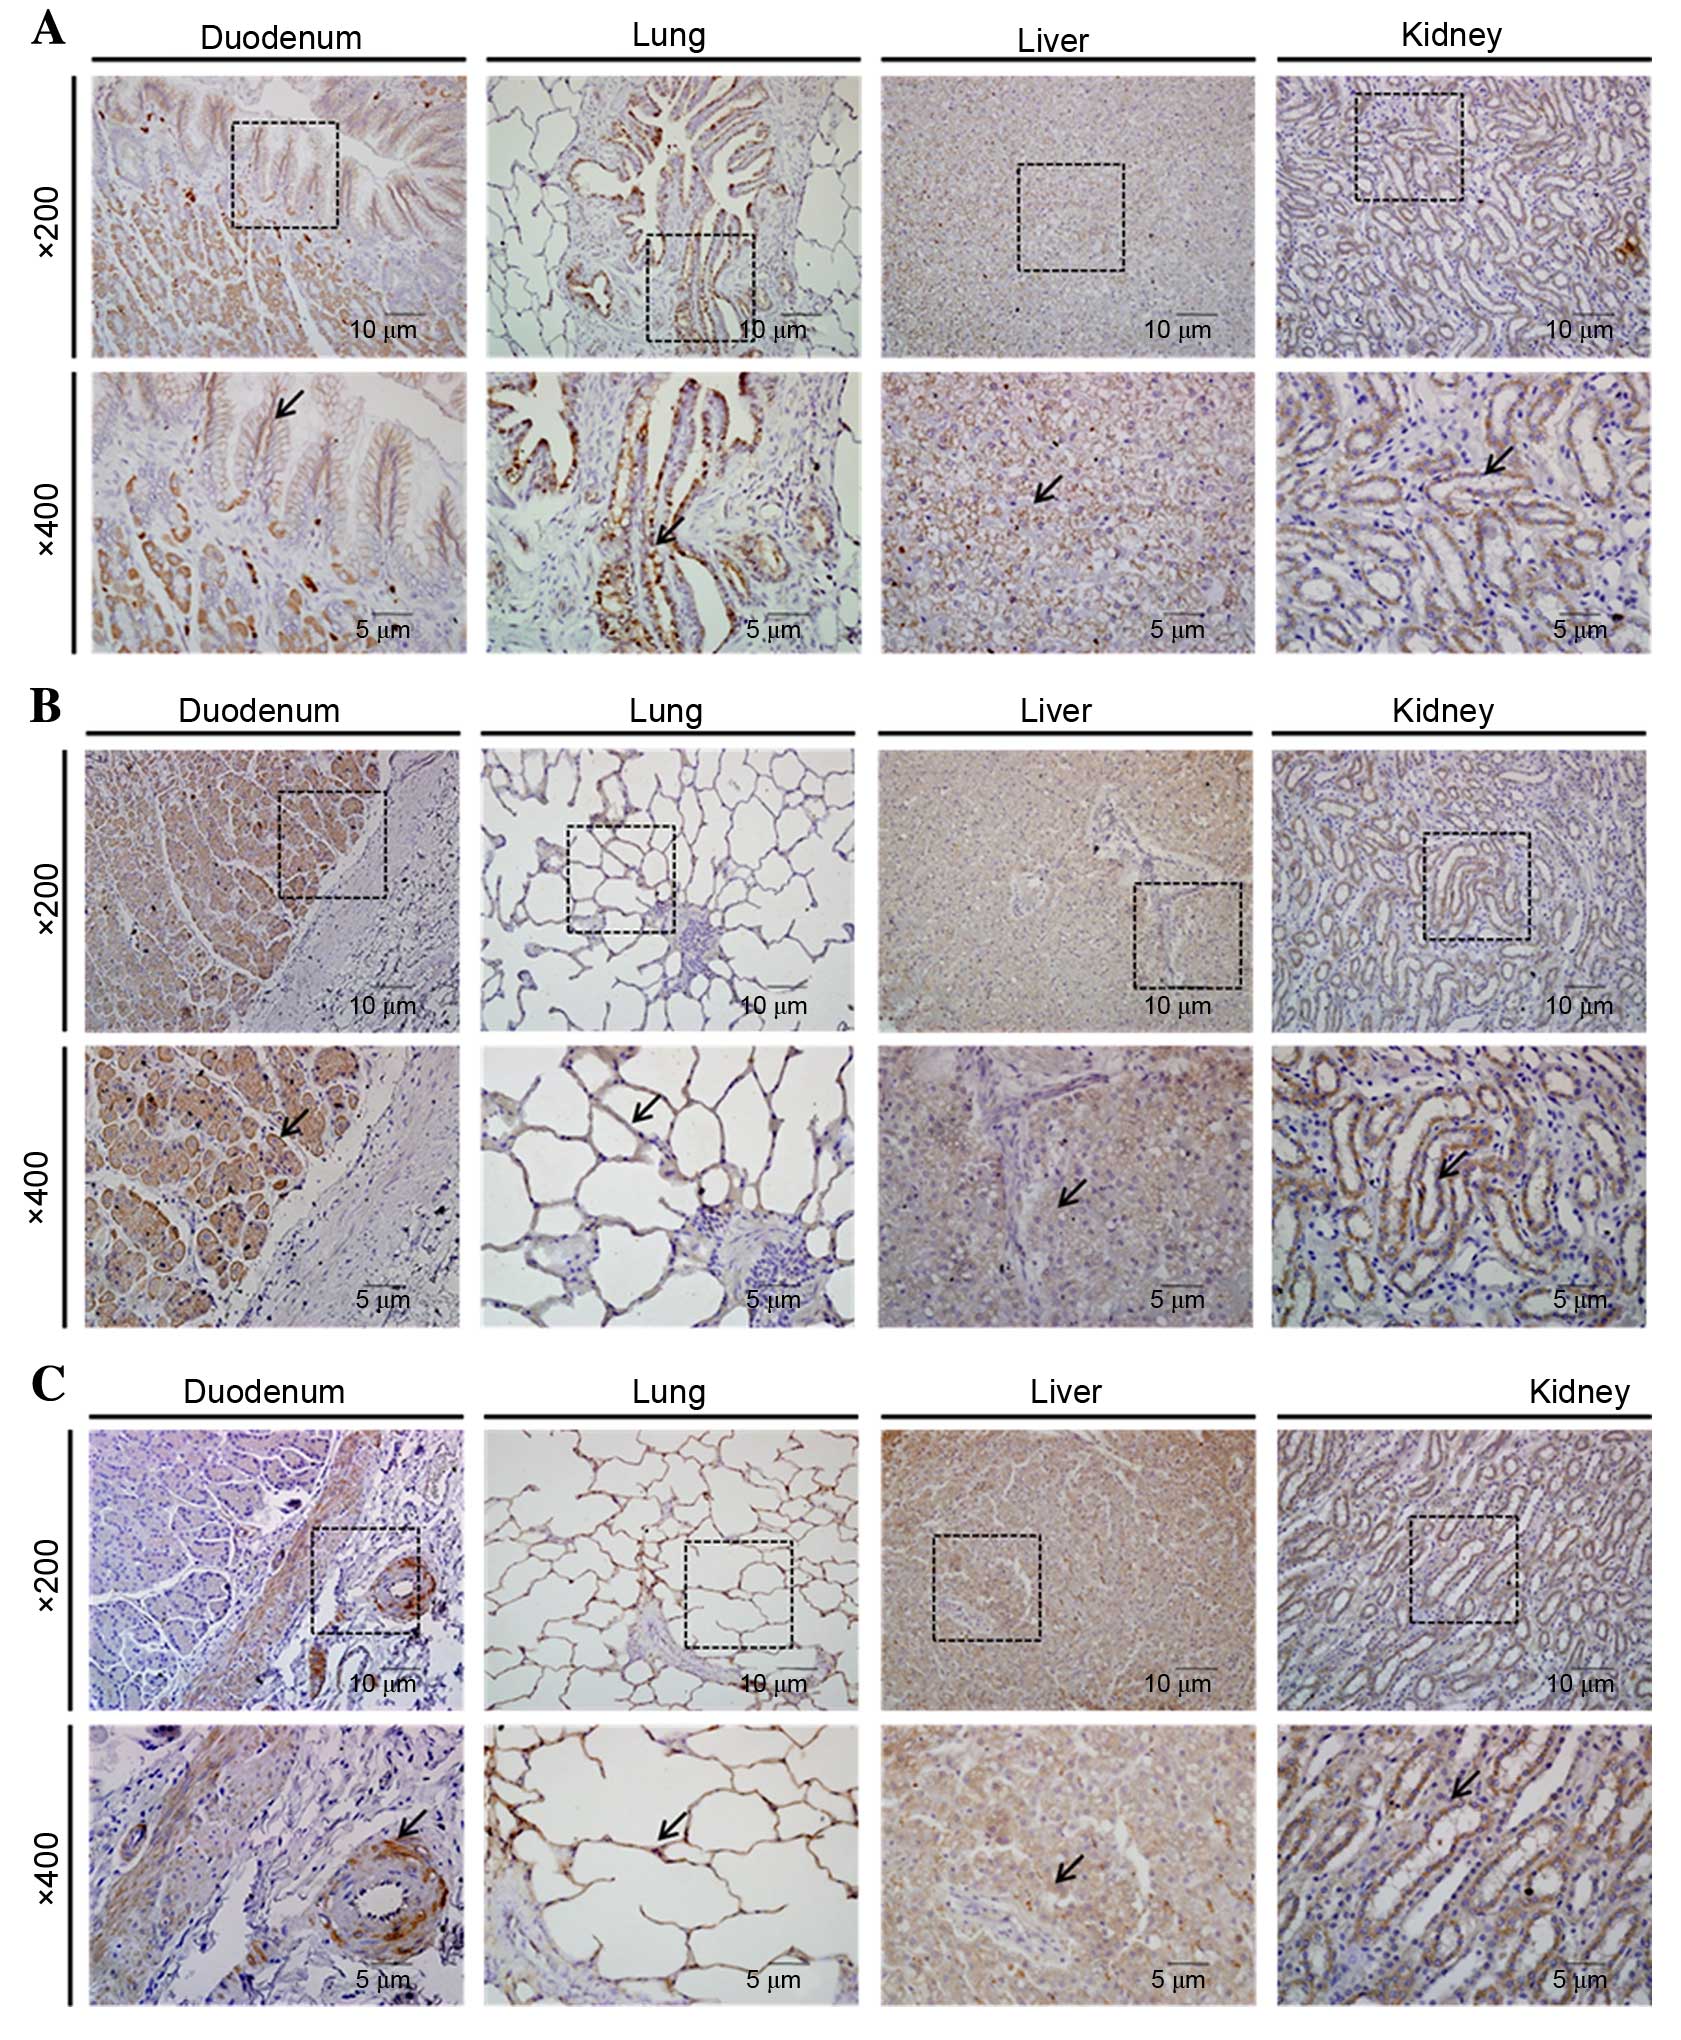 Expression Of Claudins Occludin Junction Adhesion Molecule A And Zona Occludens 1 In Canine Organs